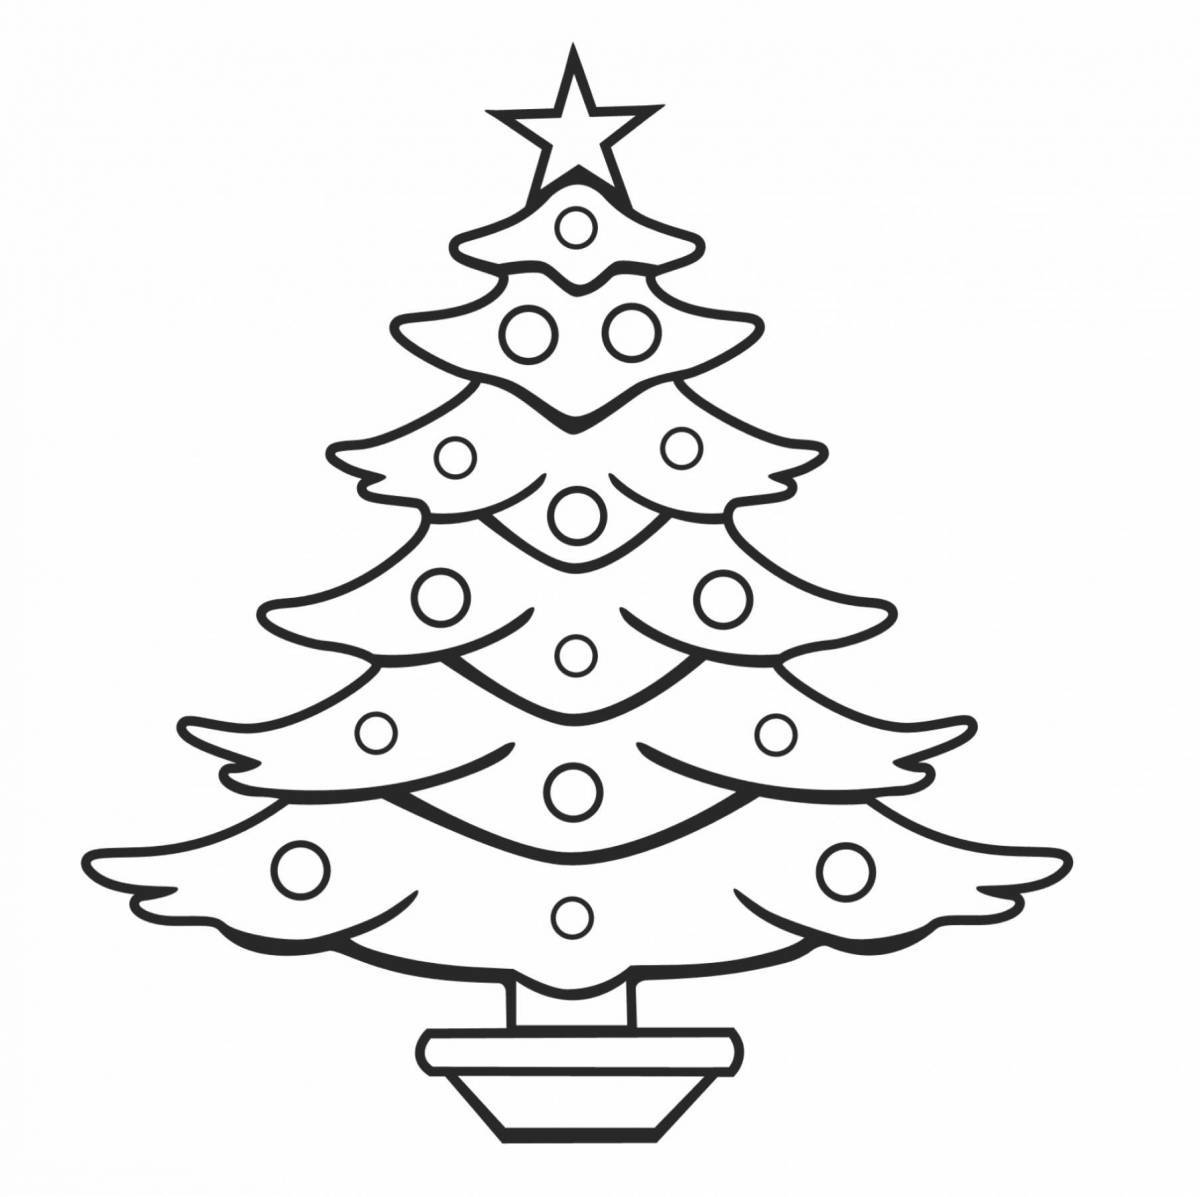 Majestic Christmas tree coloring book